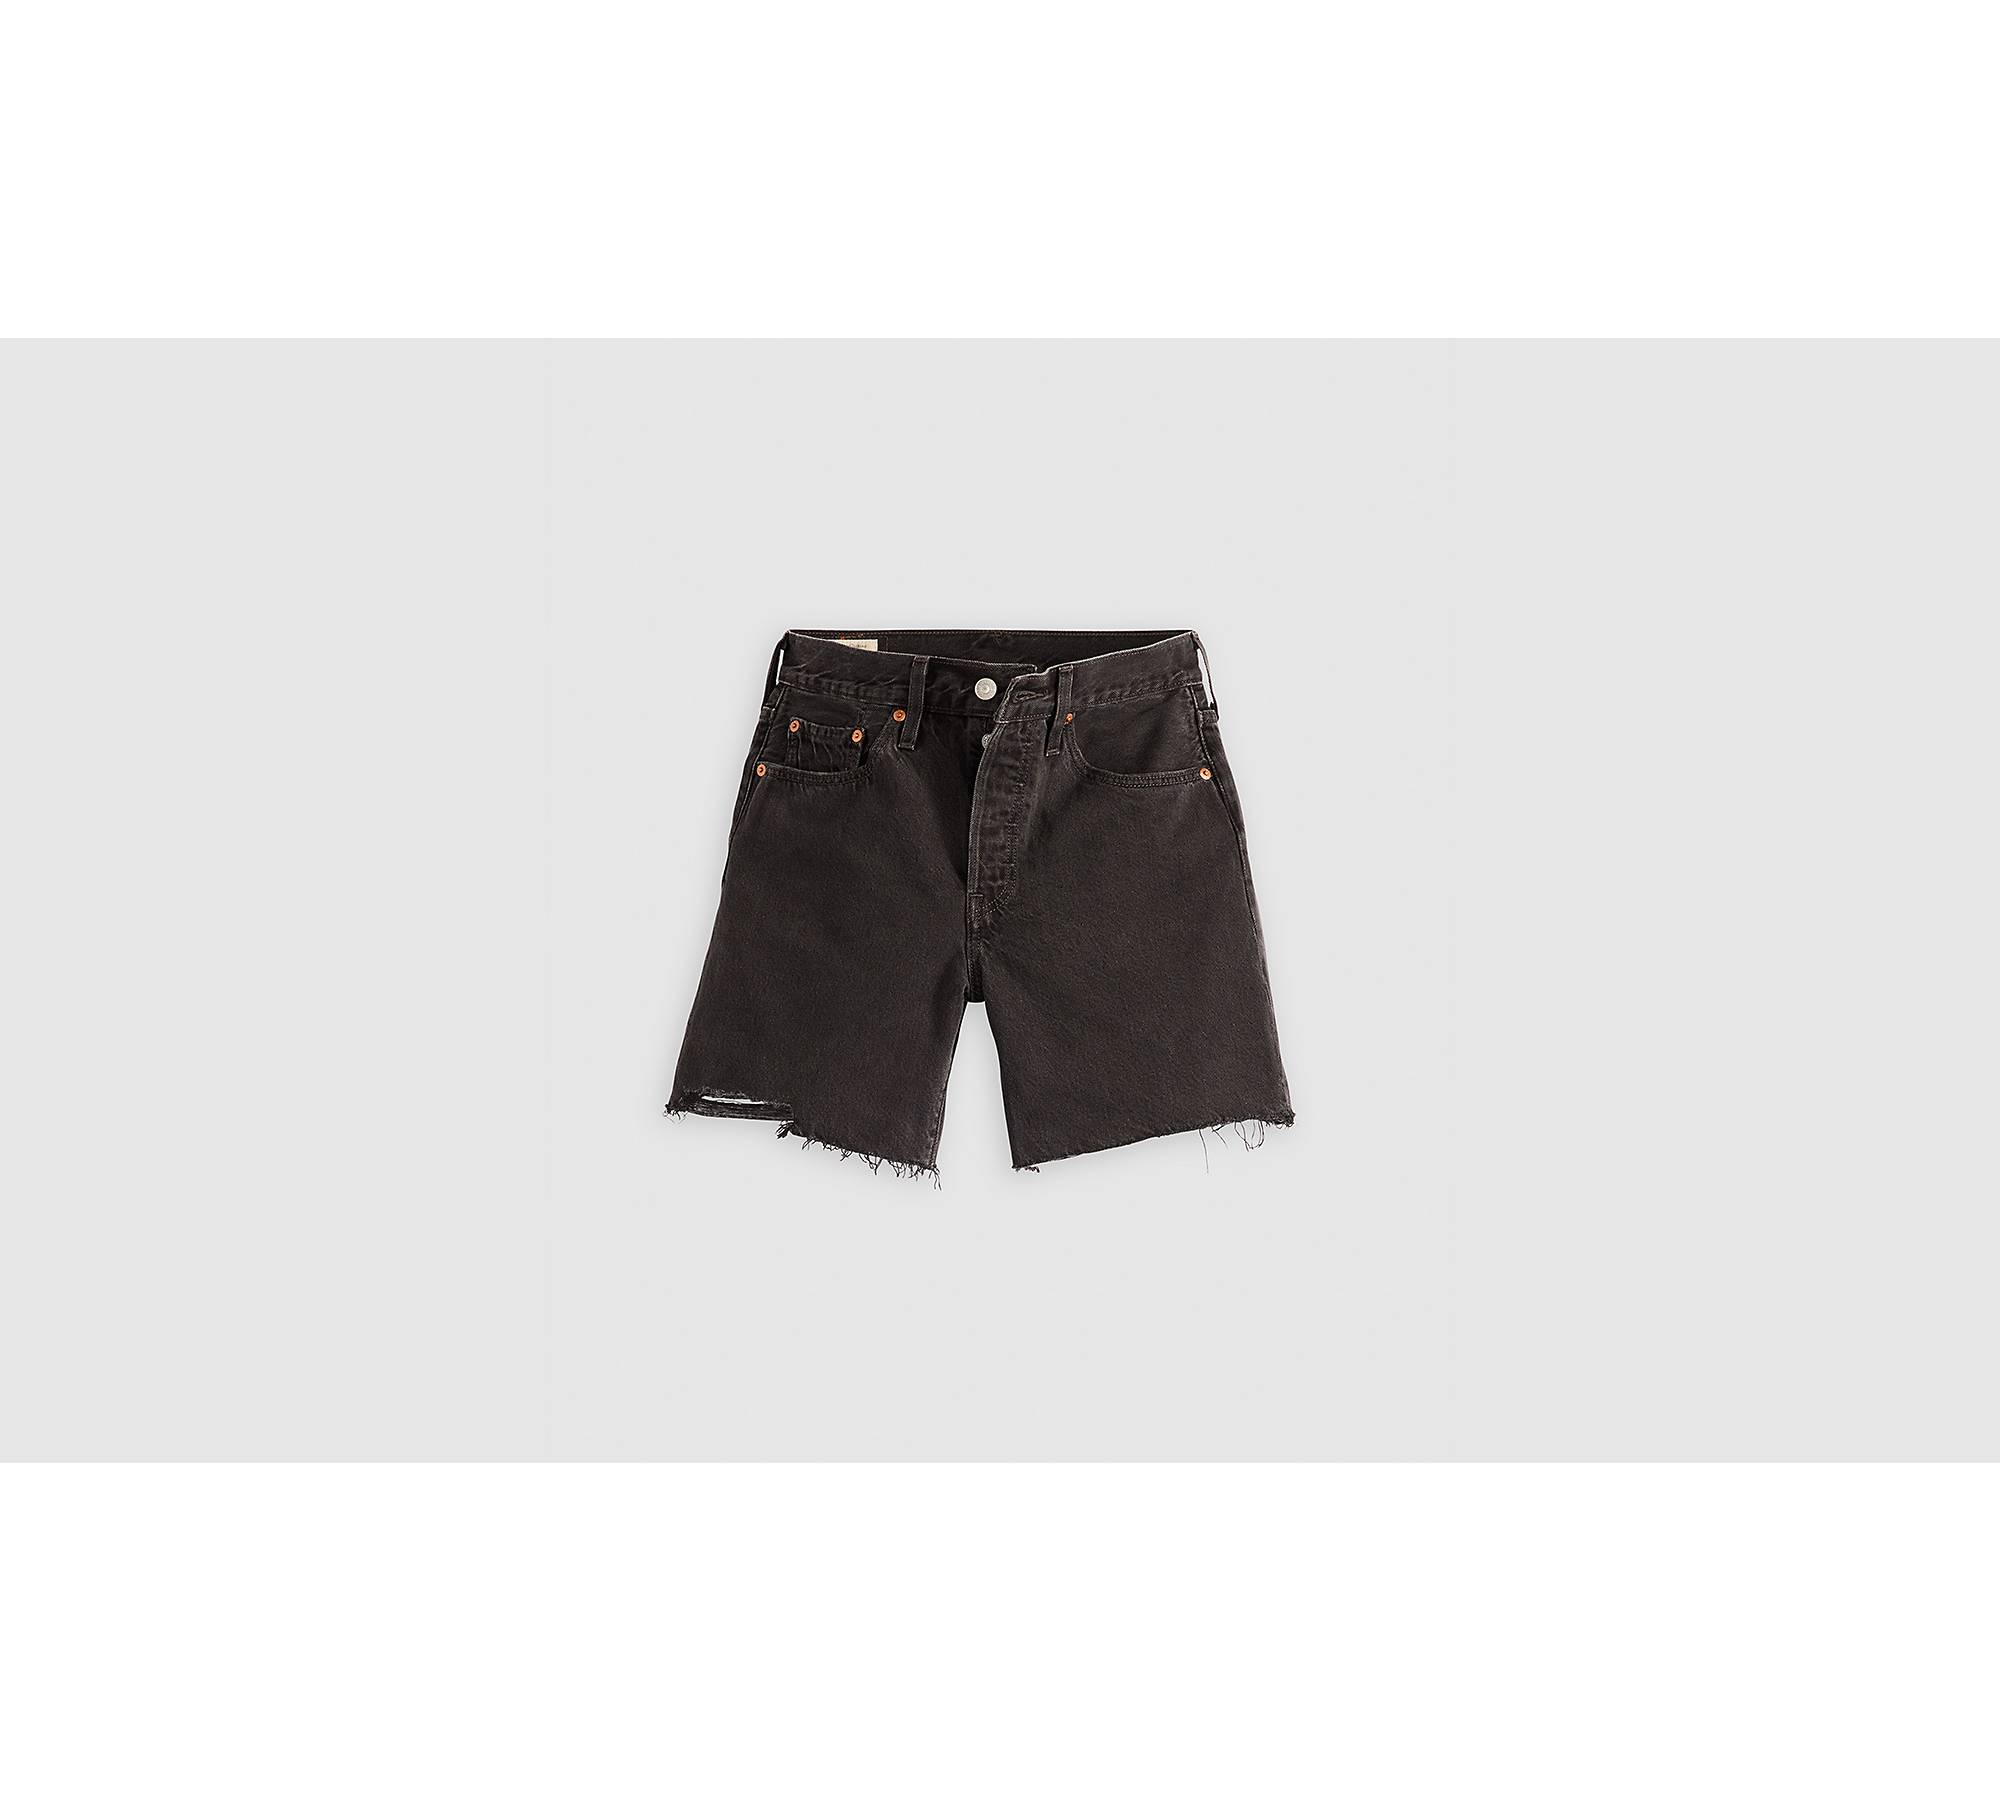 Girls' Core Tumble Shorts - All In Motion™ Black L